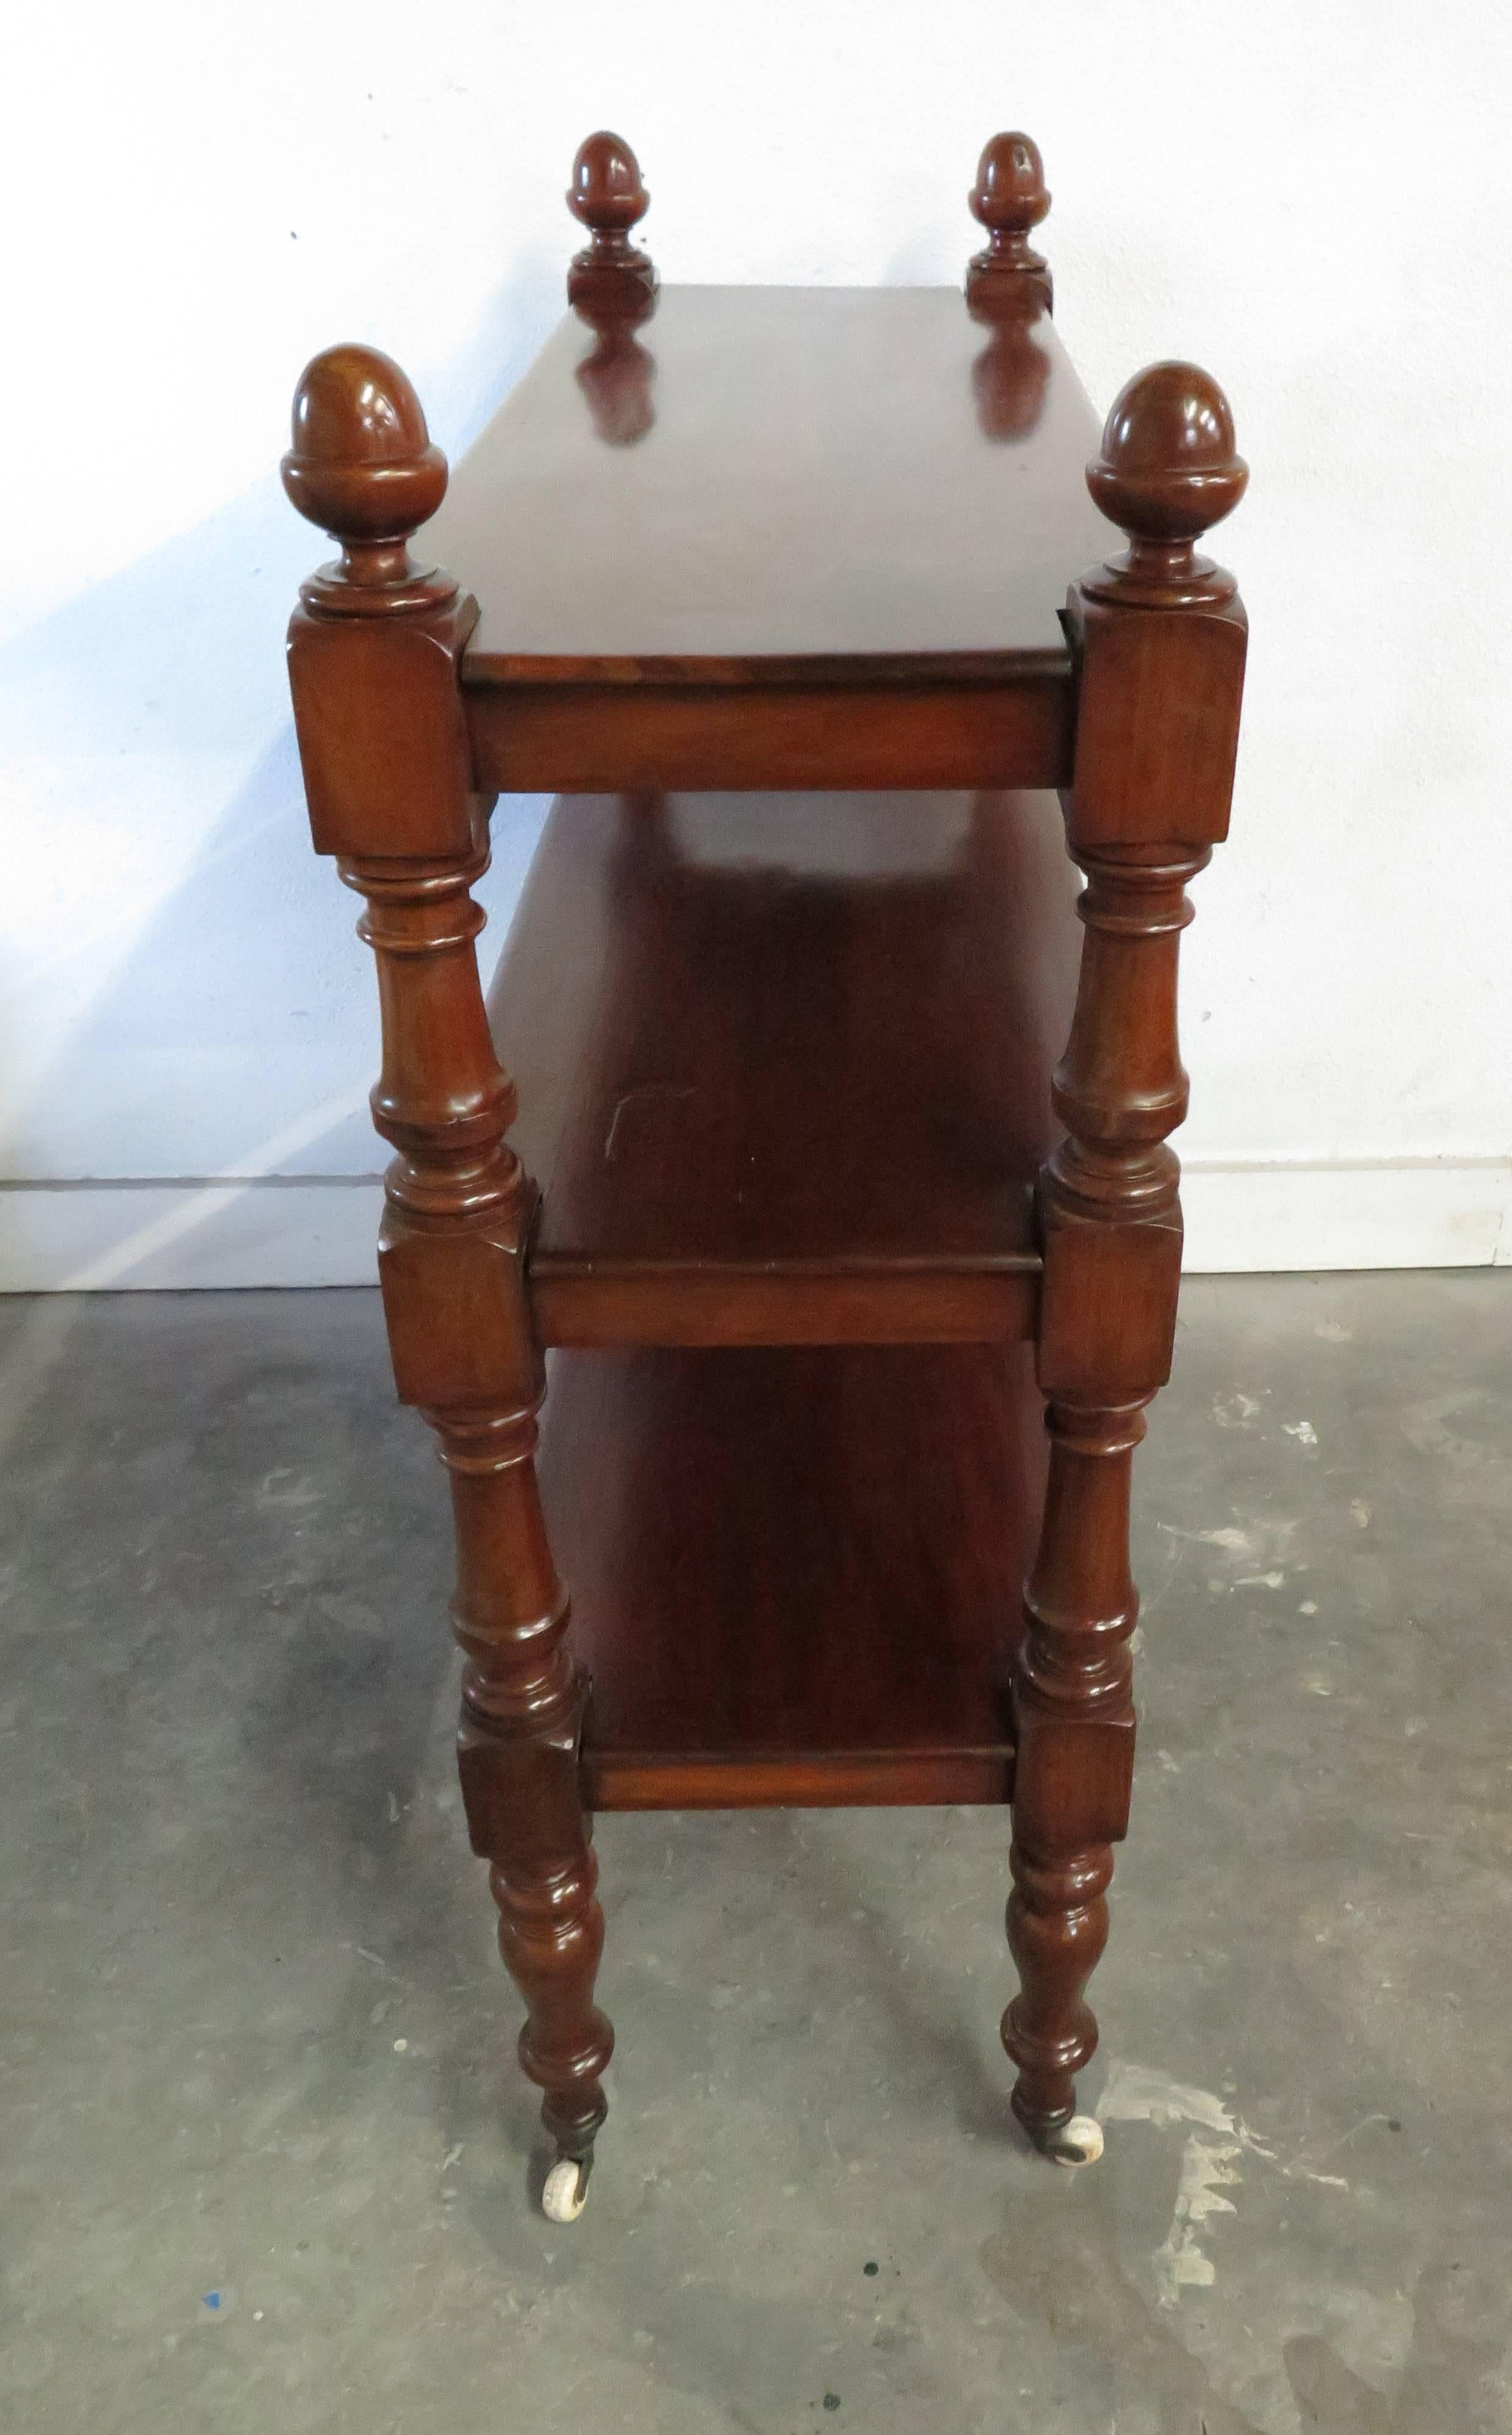 Antique English mahogany cart featuring three tiers and decorative turned posts, set upon rolling casters.